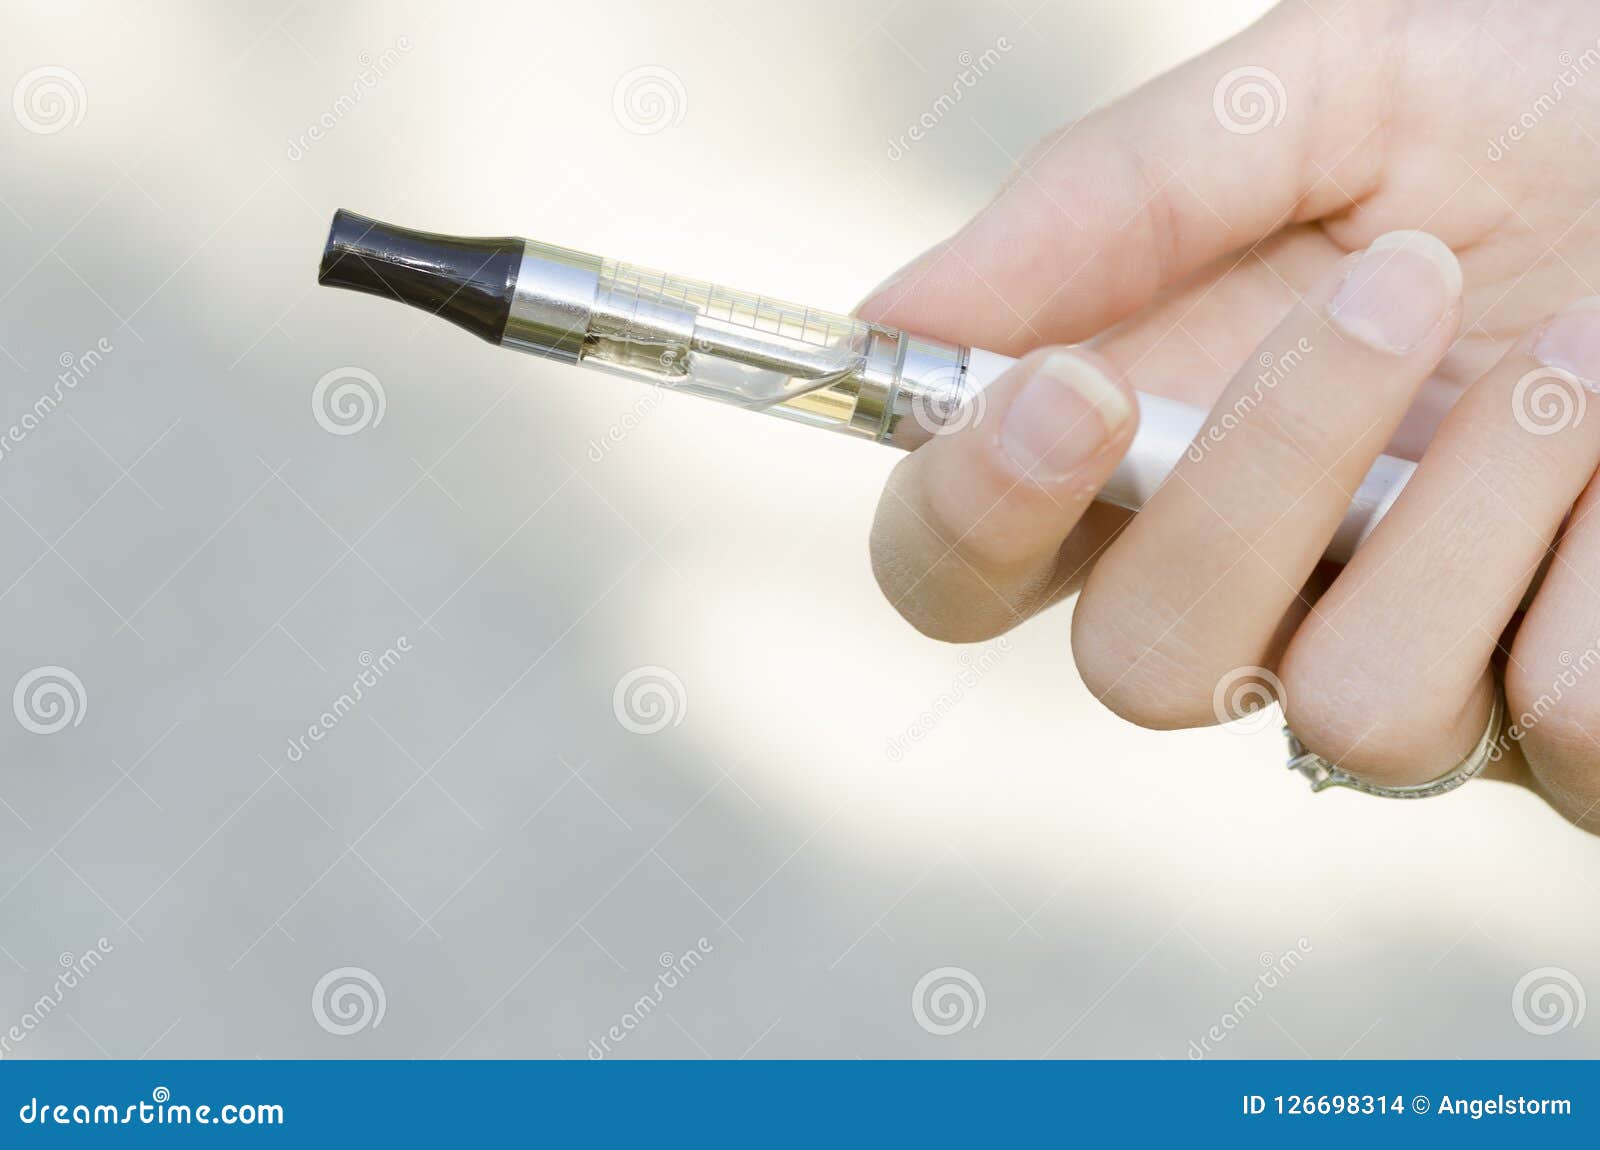 an electronic cigarette